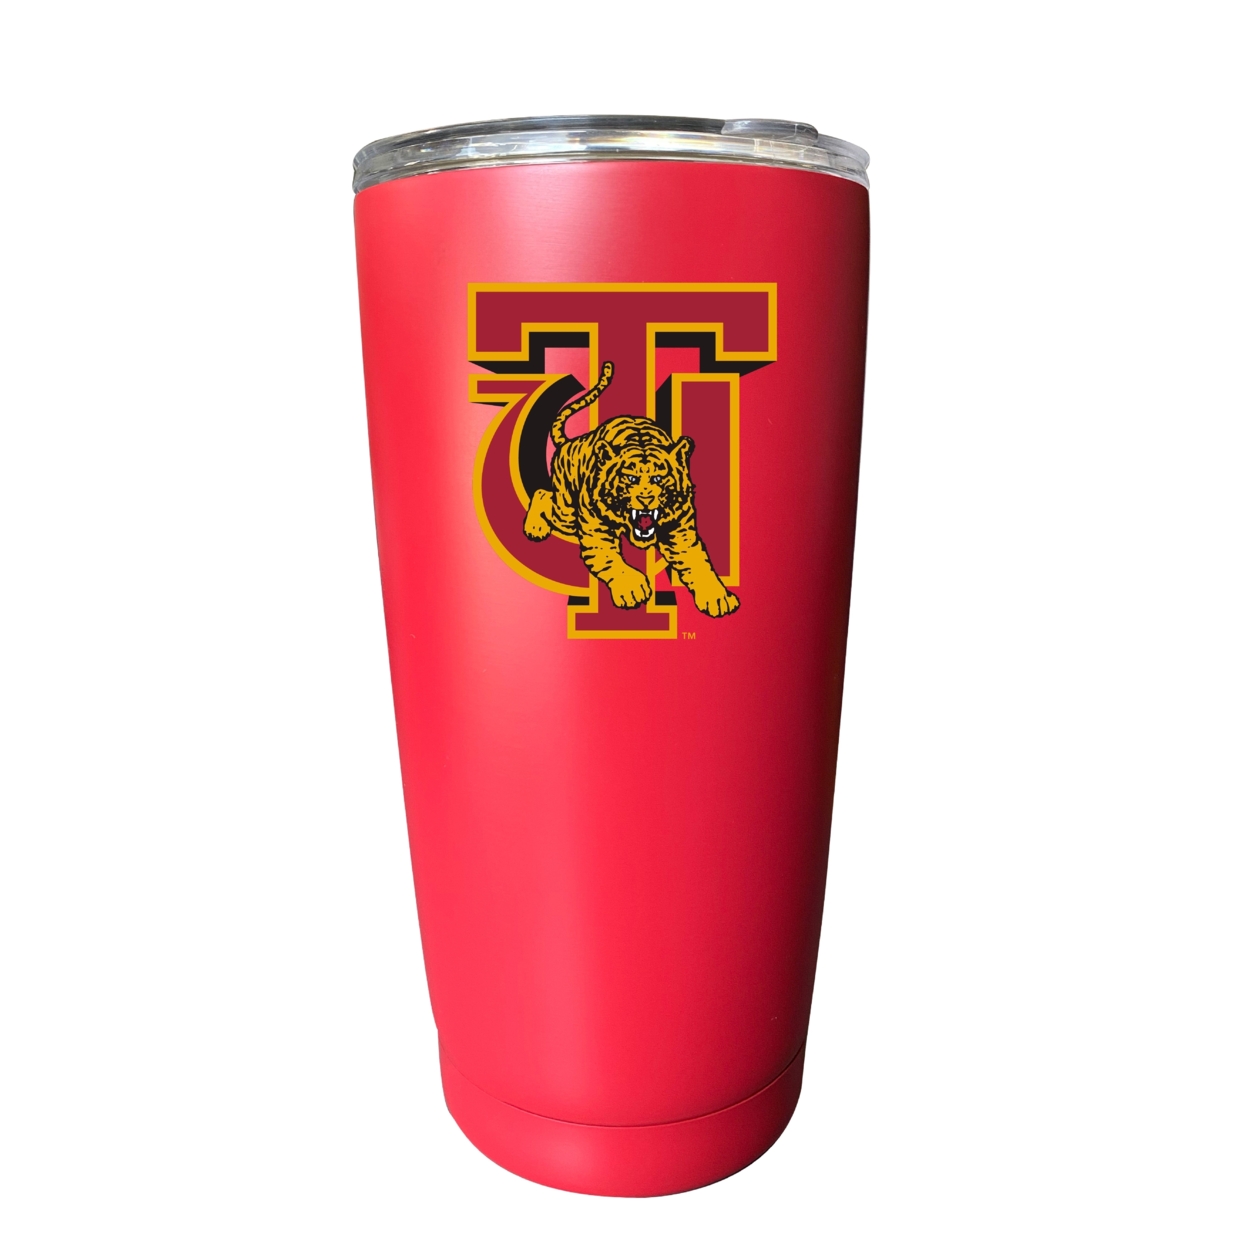 Tuskegee University 16 Oz Insulated Stainless Steel Tumbler - Choose Your Color. - Seafoam